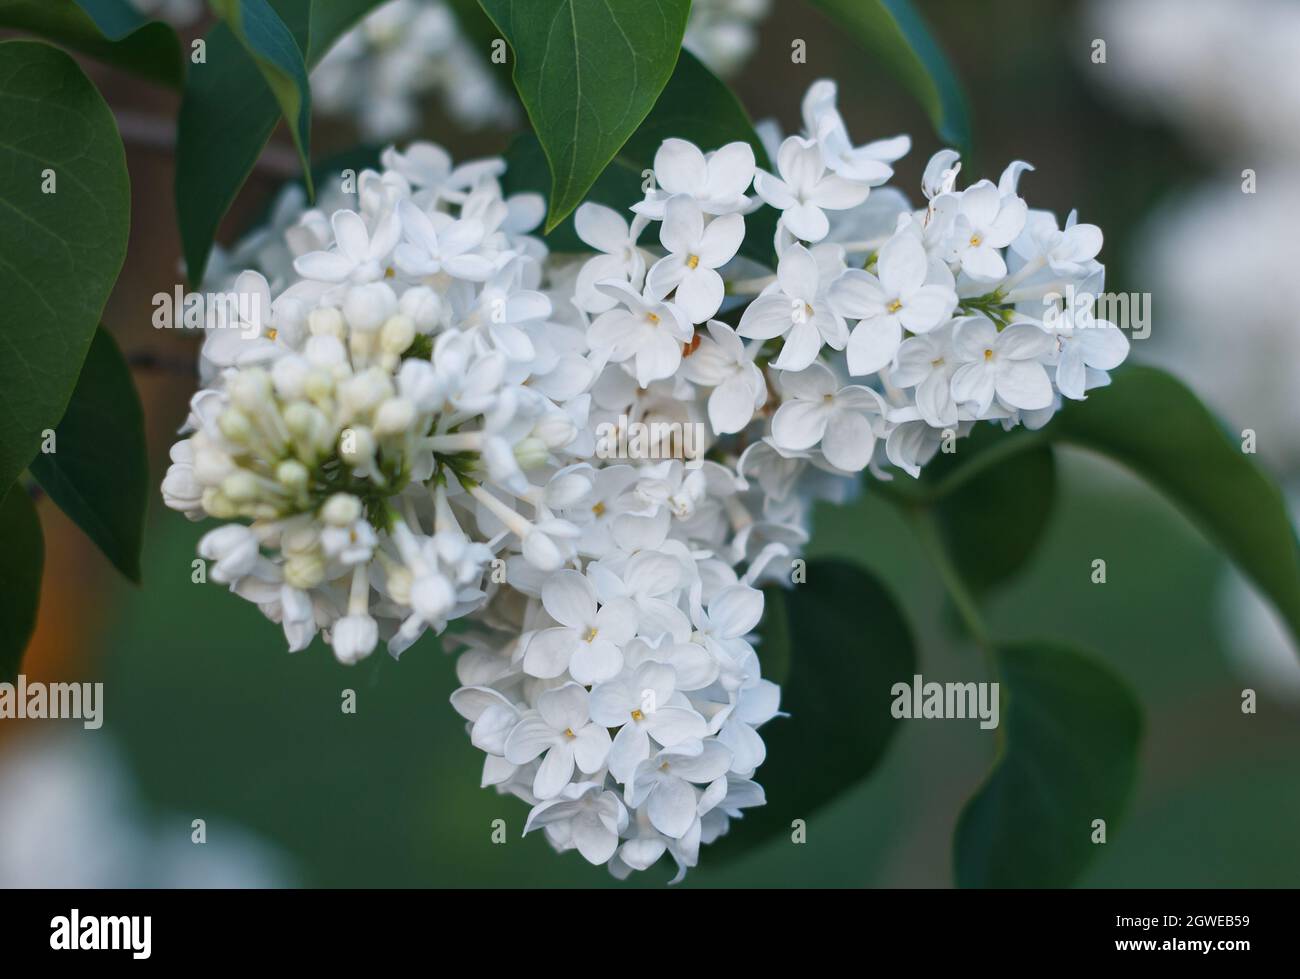 Blossoming decorative white lilac Syringa tree on a green background from leaves and sky Stock Photo